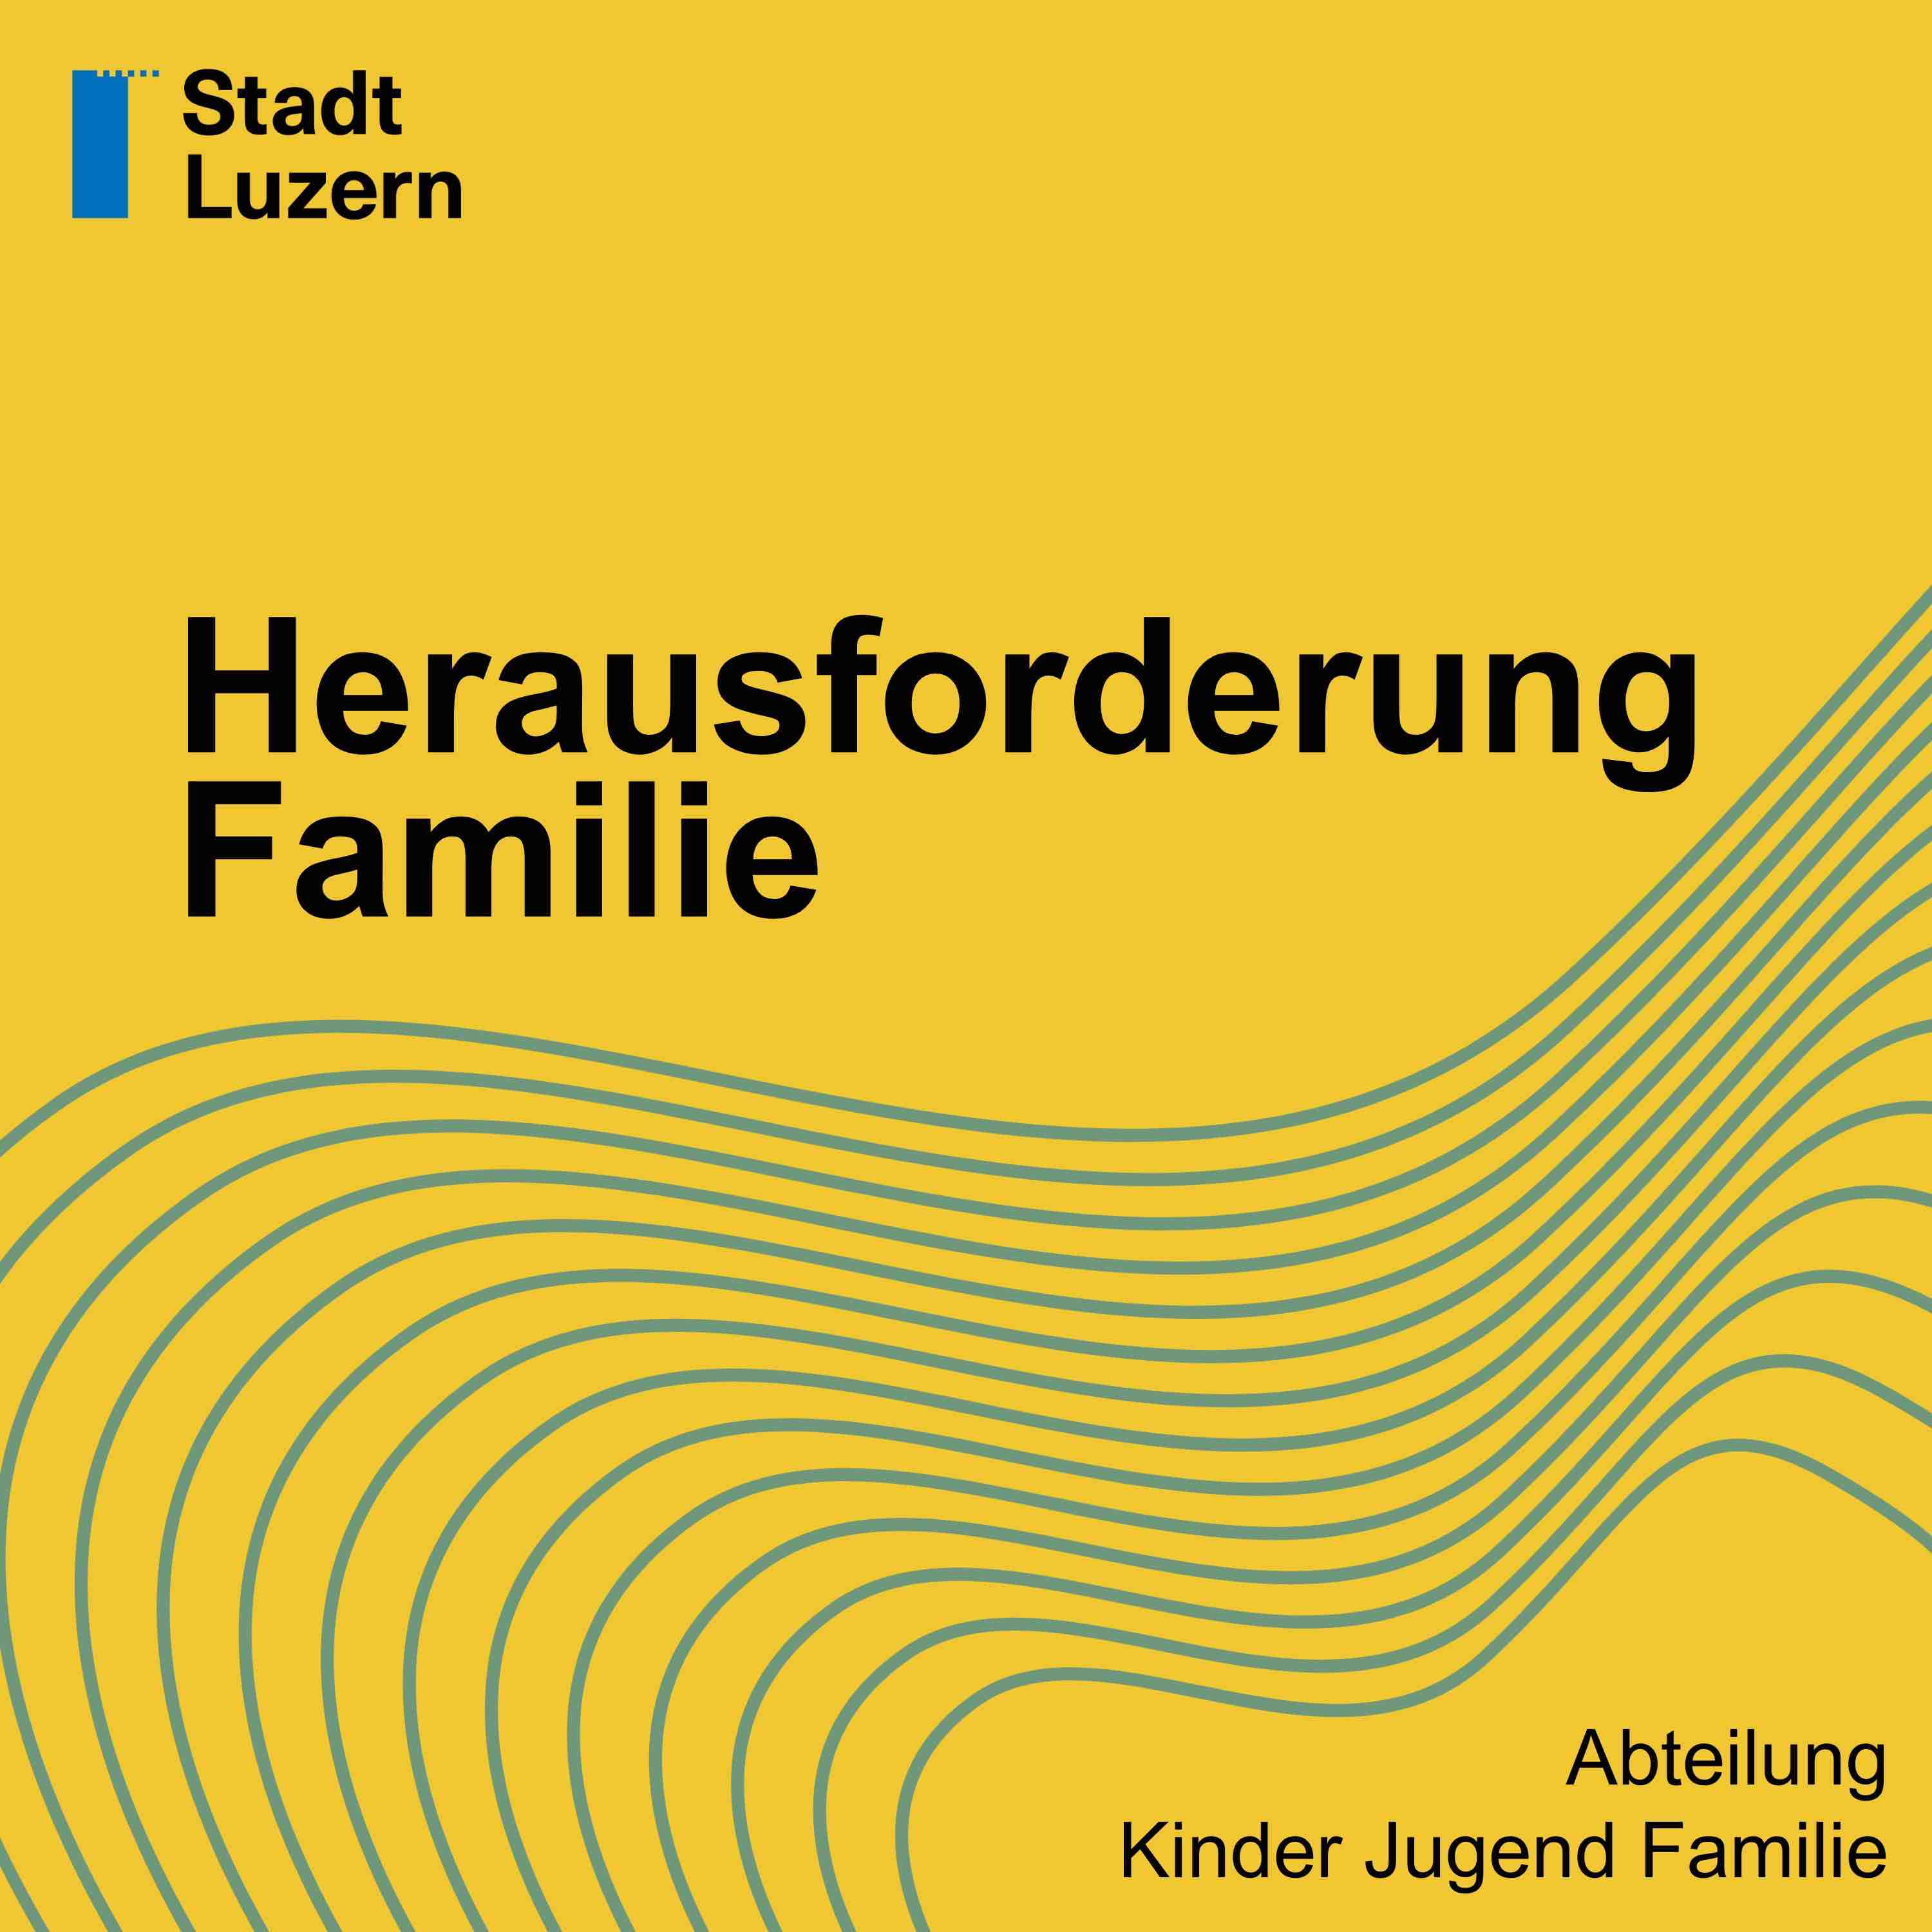 Artwork for Herausforderung Familie